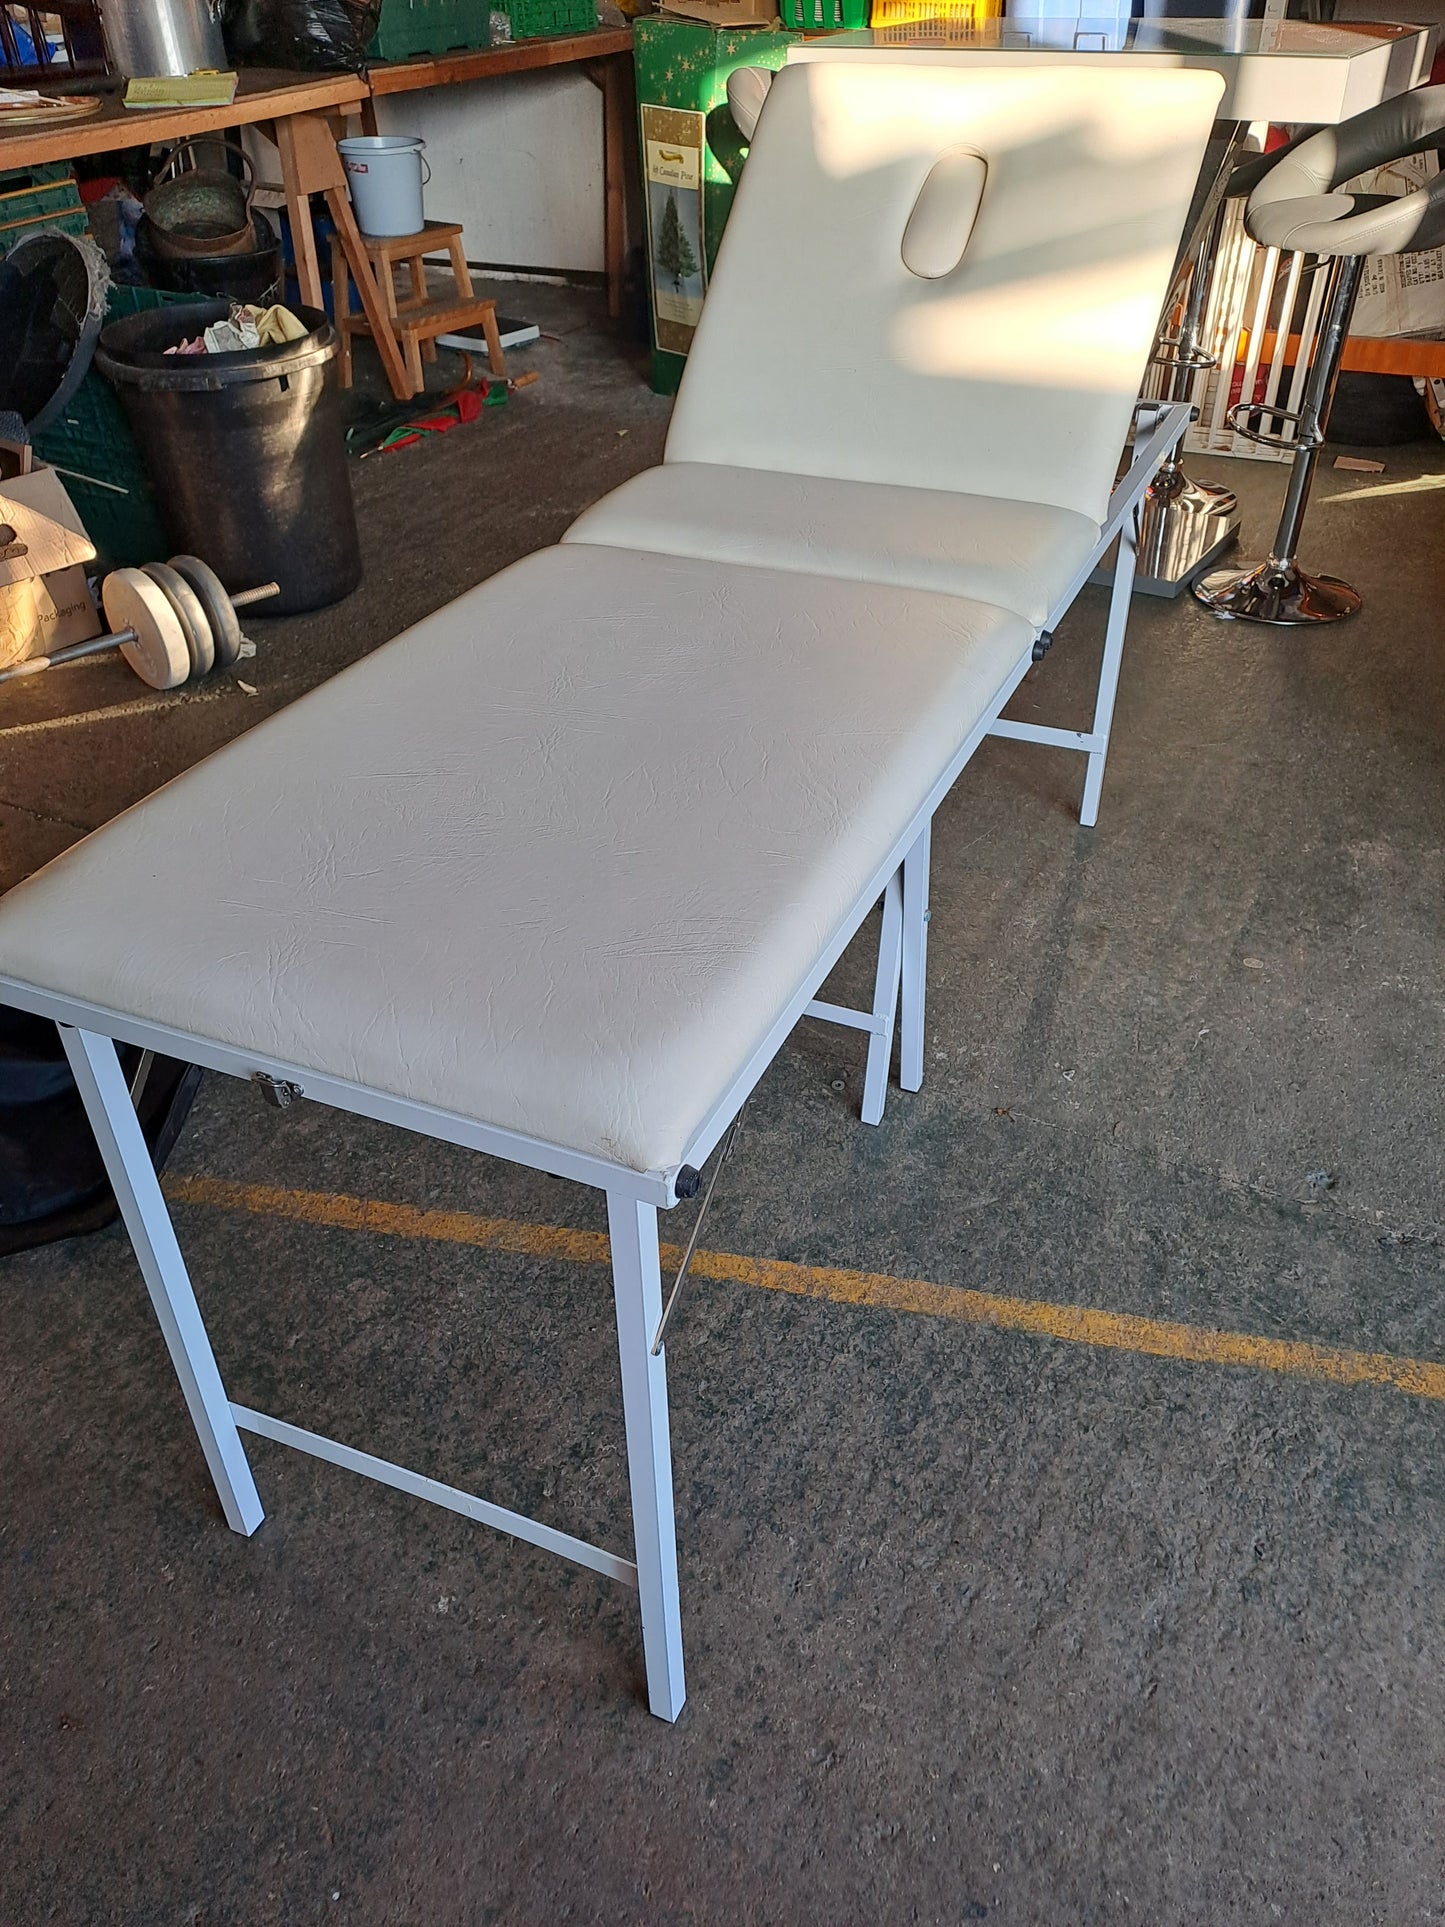 Mercia Collection - Massage Table